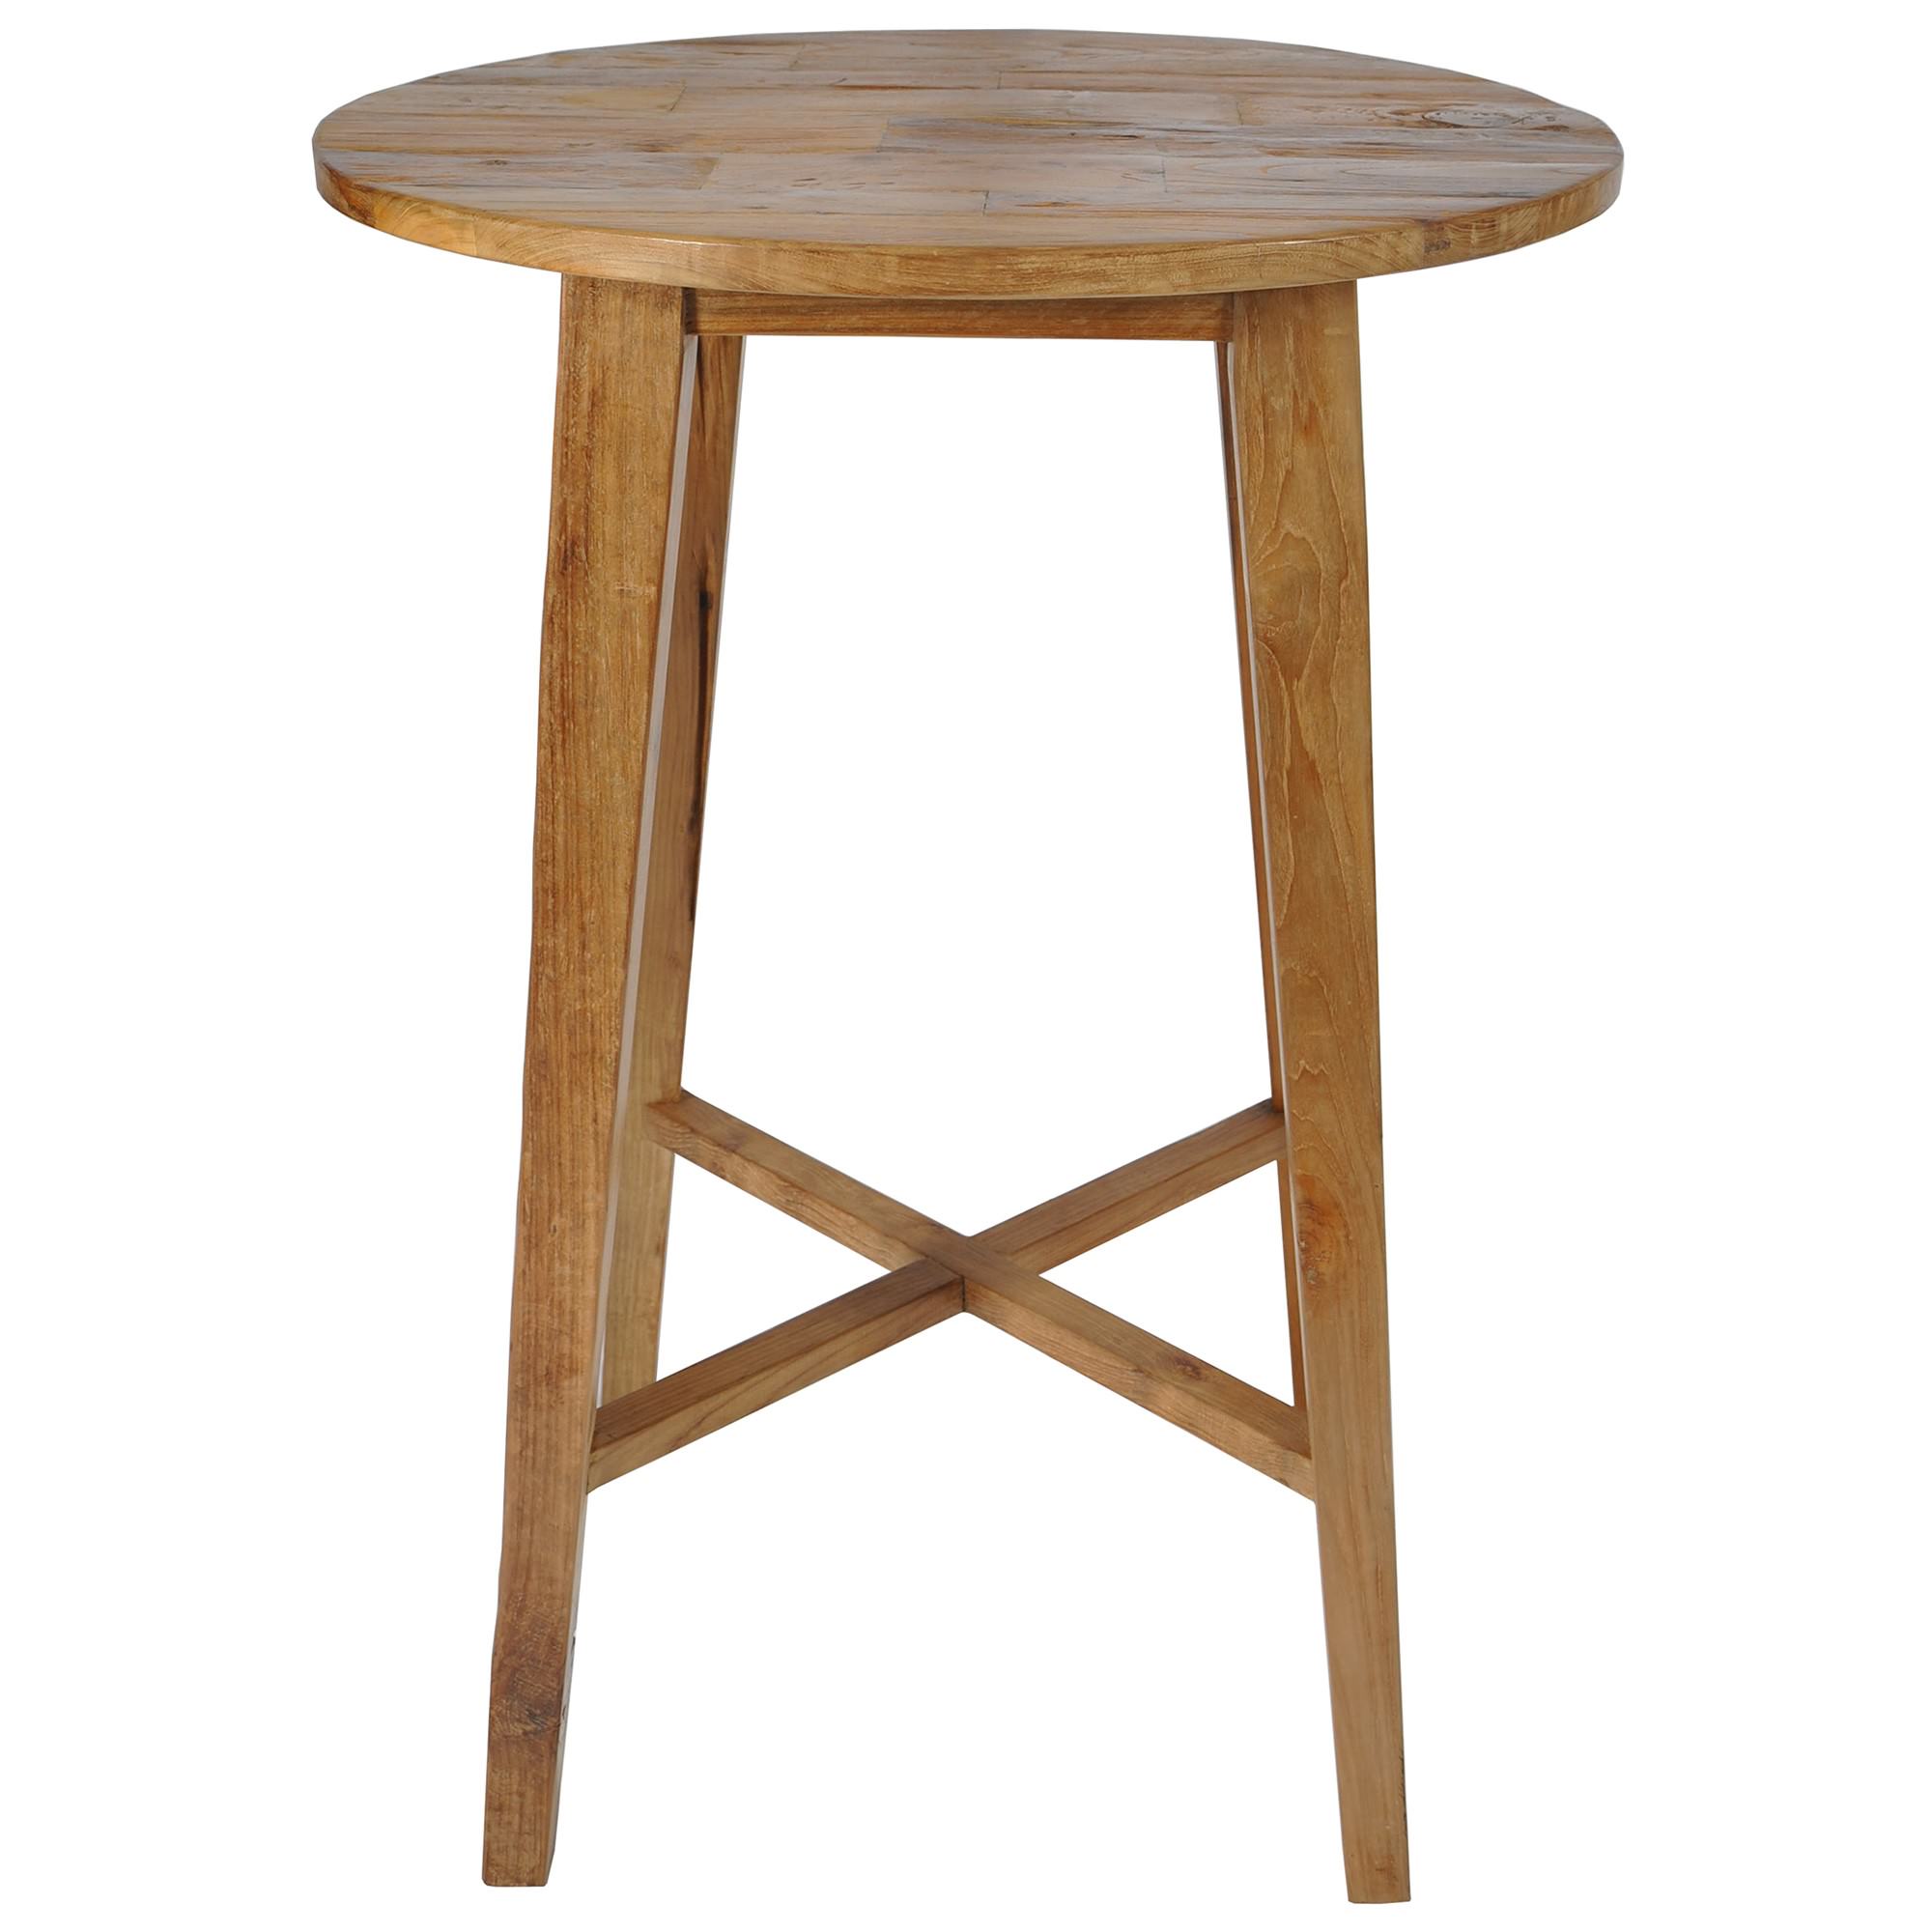 Tropica Woody Commercial Grade Reclaimed Teak Timber Round Bar Table, 80cm